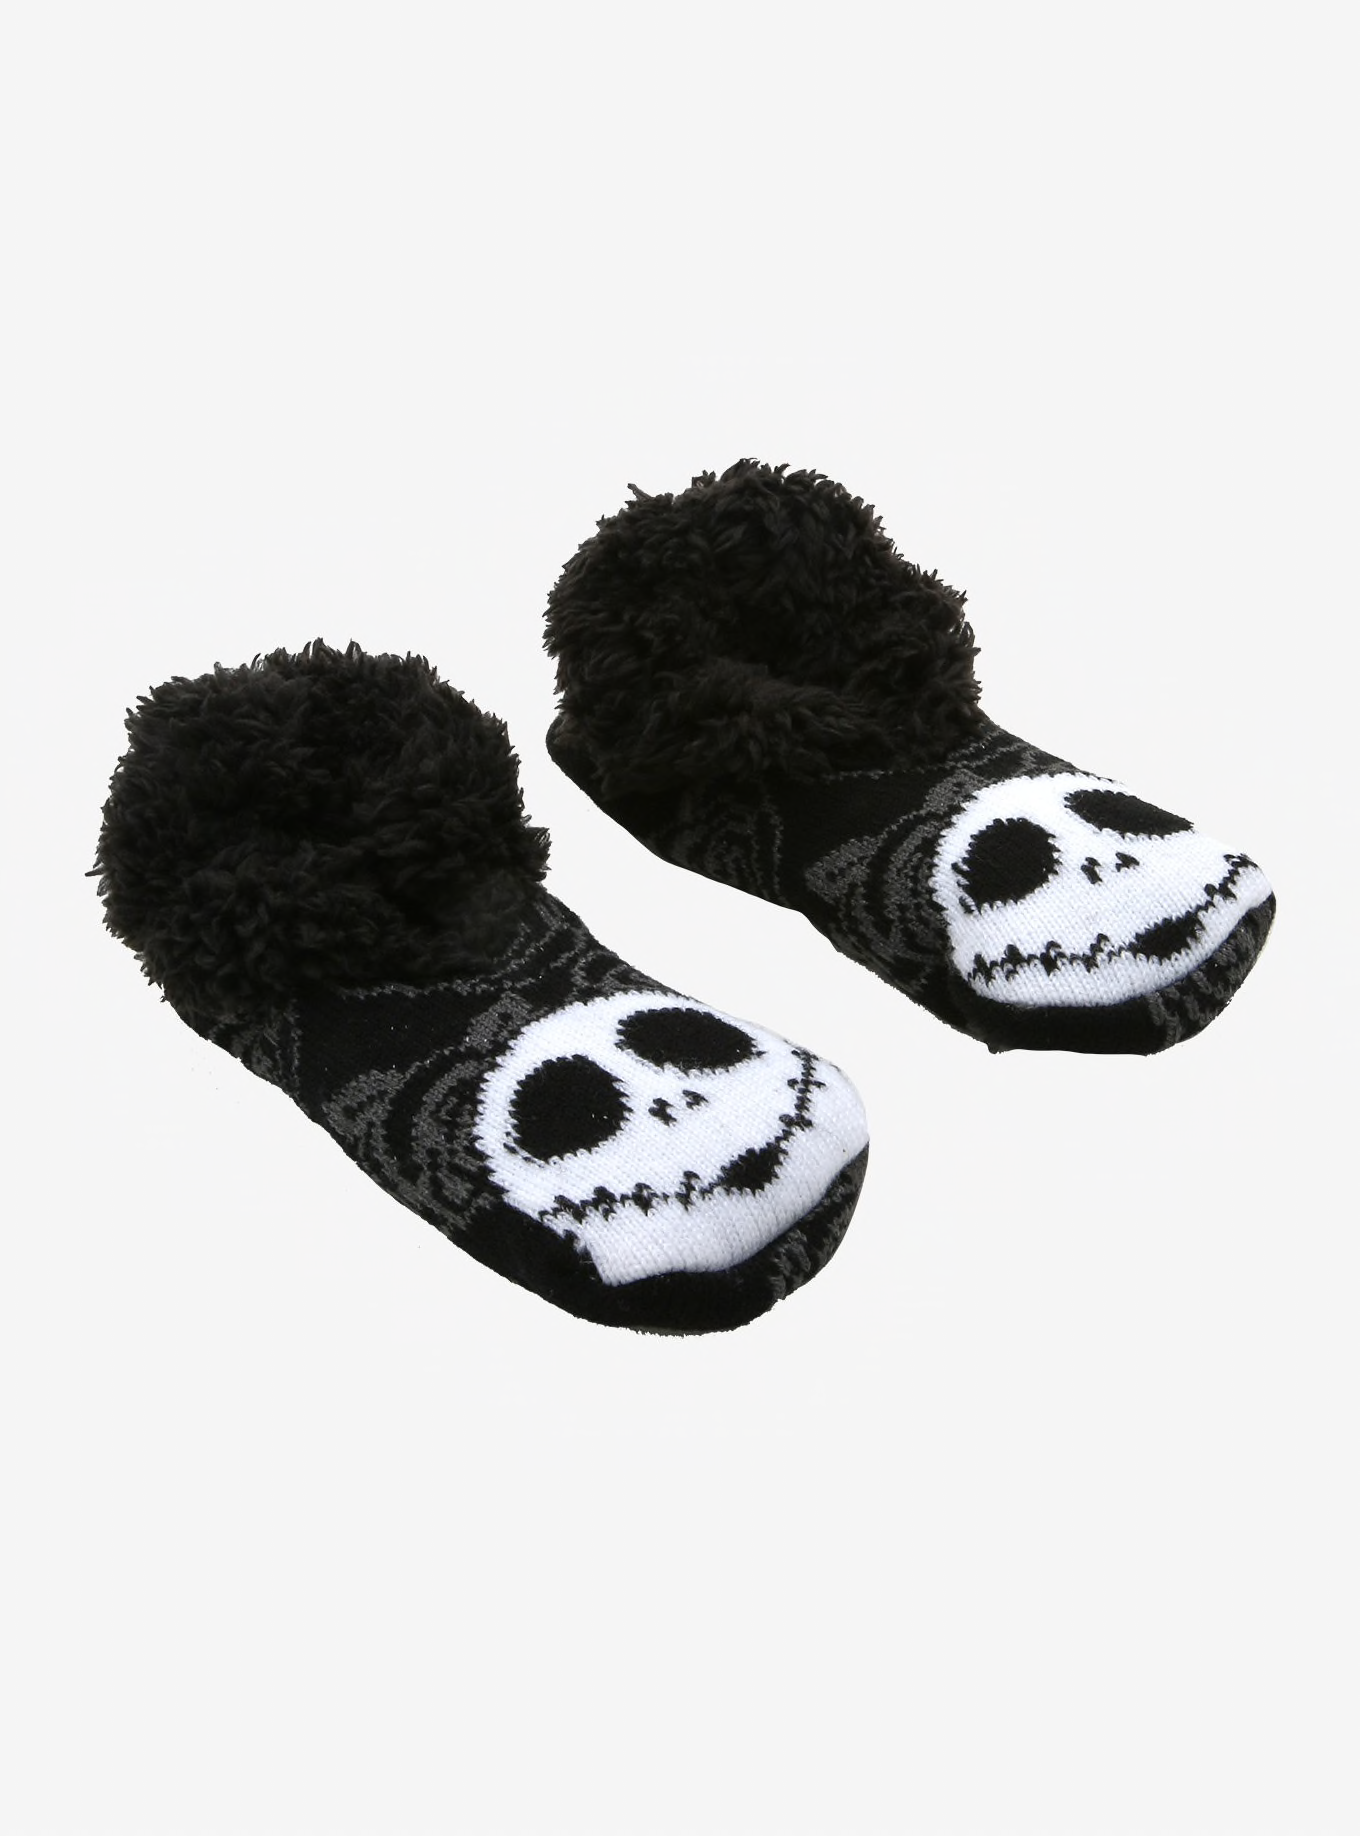 THE NIGHTMARE BEFORE CHRISTMAS JACK HEAD ROSE COZY SLIPPERS